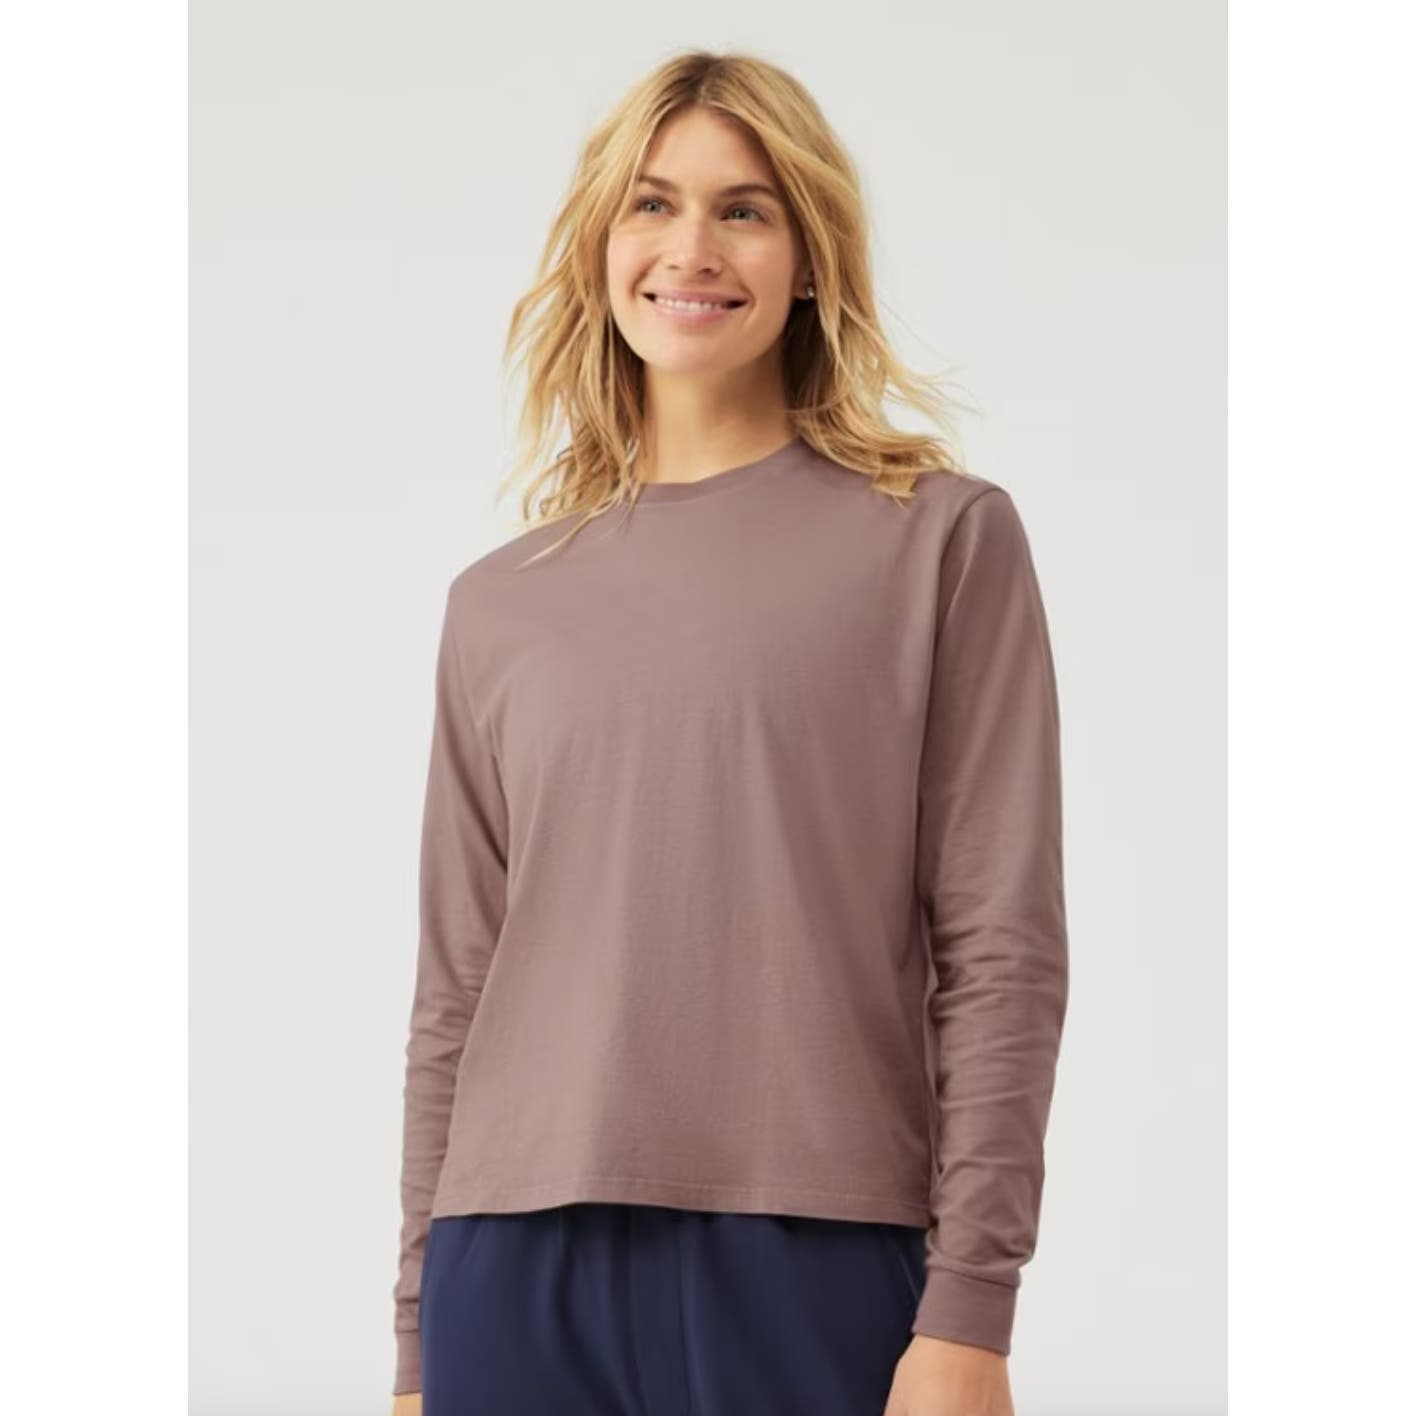 Outdoor Voices NWT Everyday Longsleeve Top Truffle Size XXS